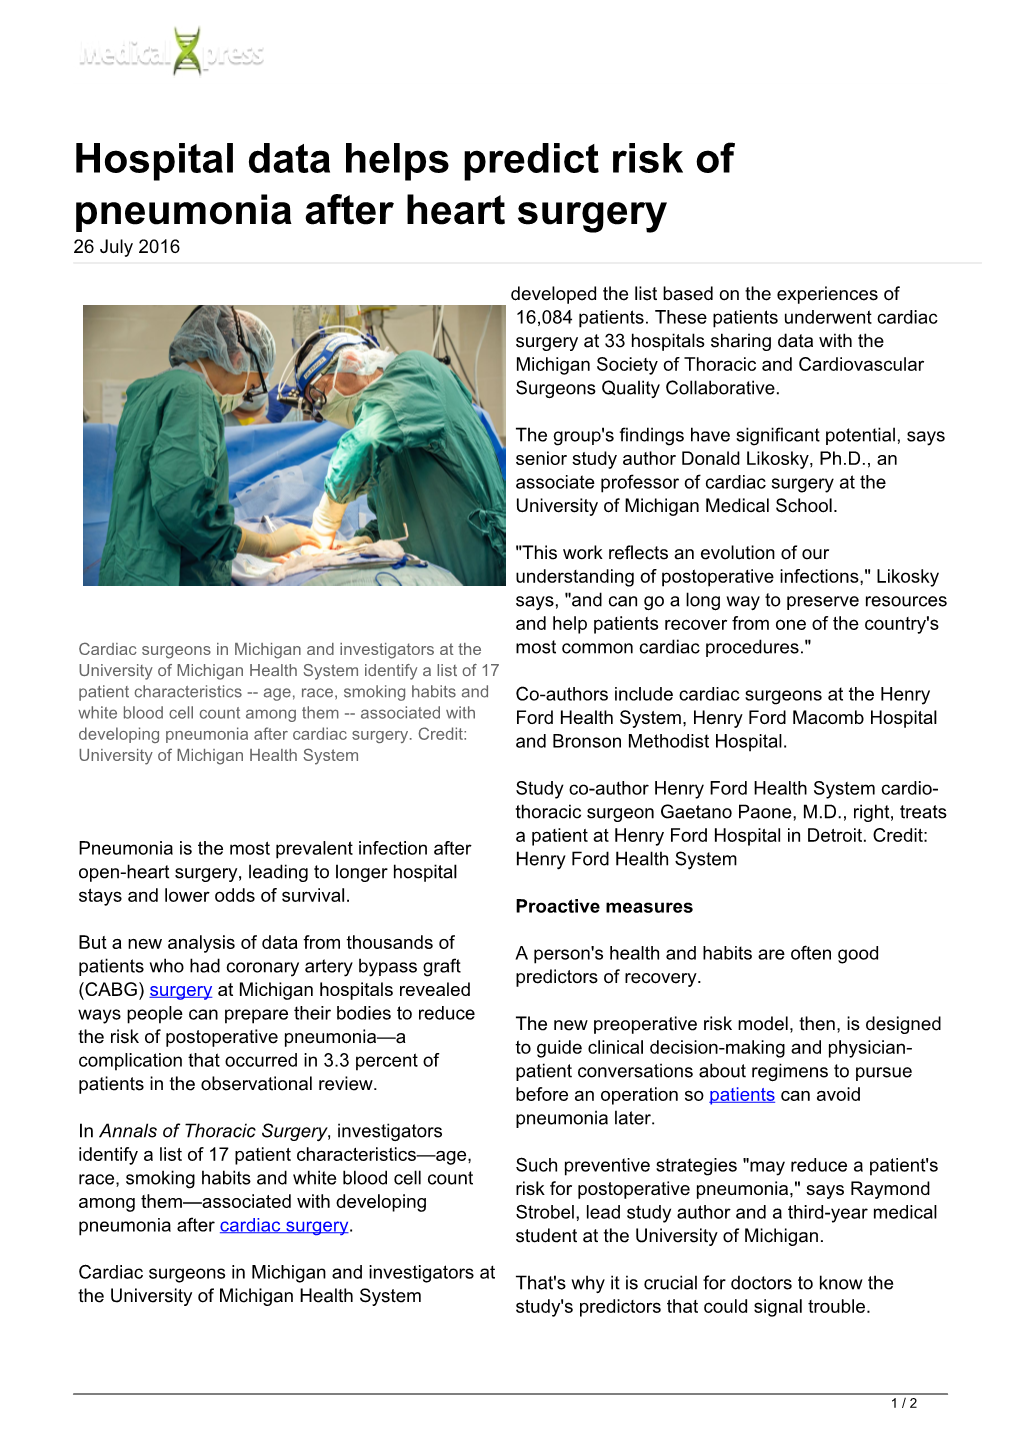 Hospital Data Helps Predict Risk of Pneumonia After Heart Surgery 26 July 2016